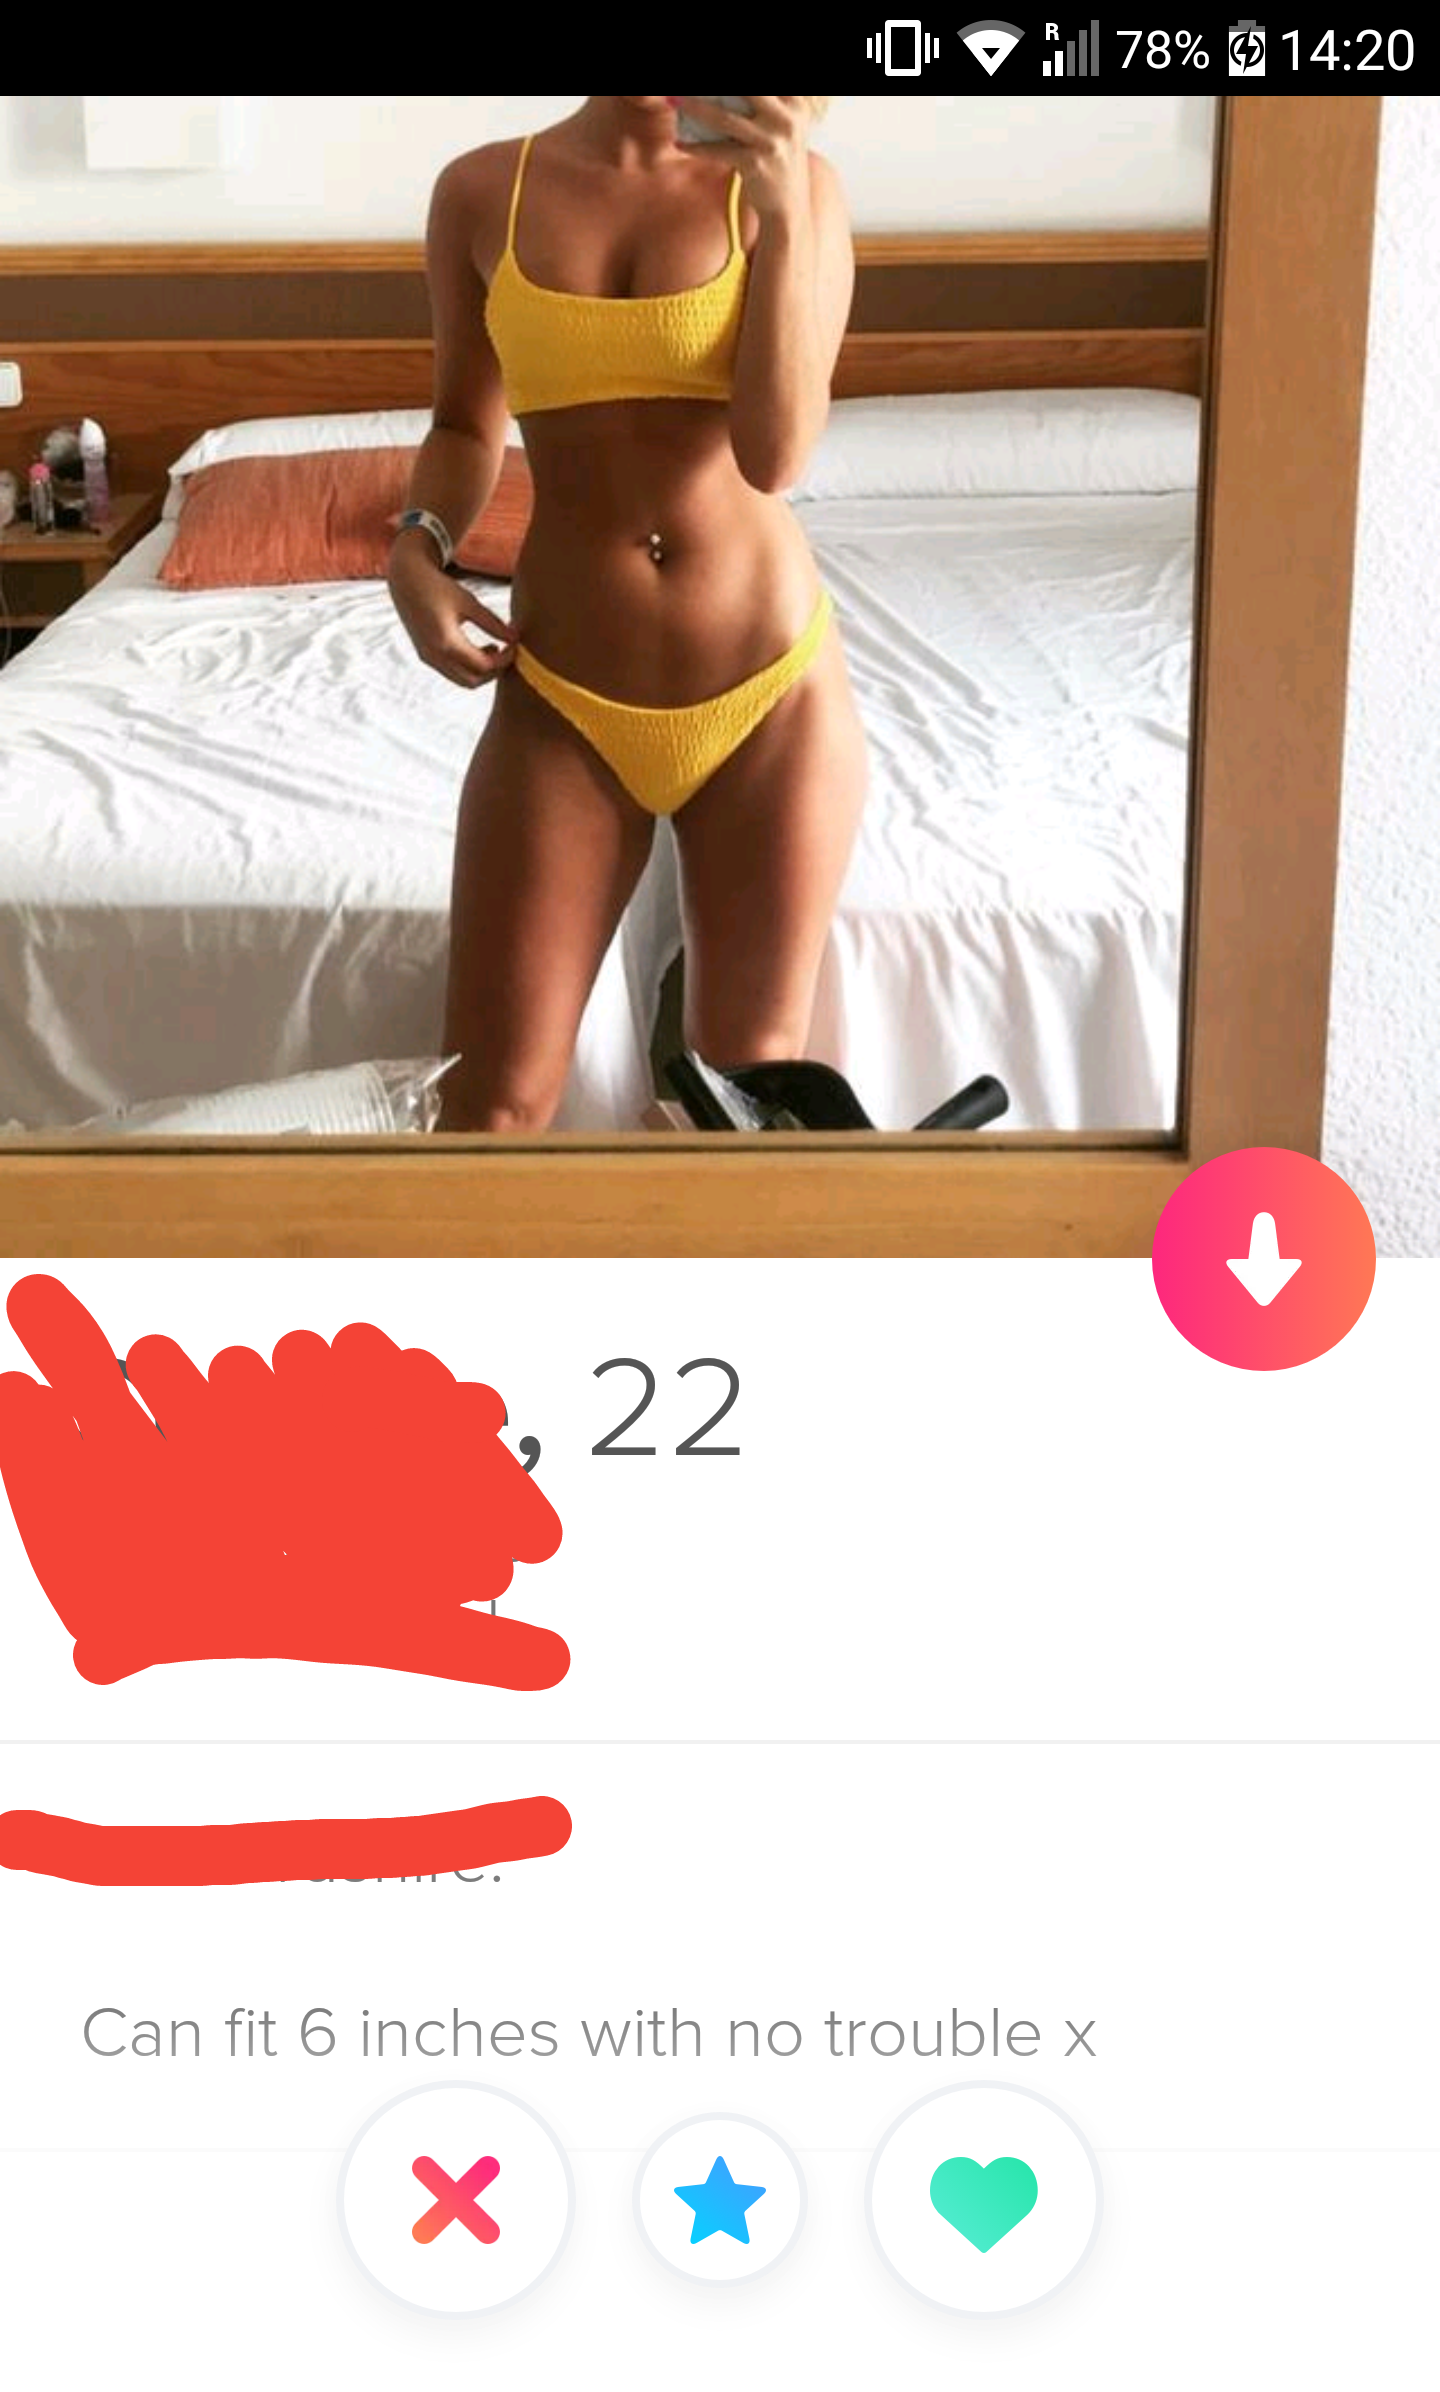 tinder wins and fails -Can fit 6 inches with no trouble x